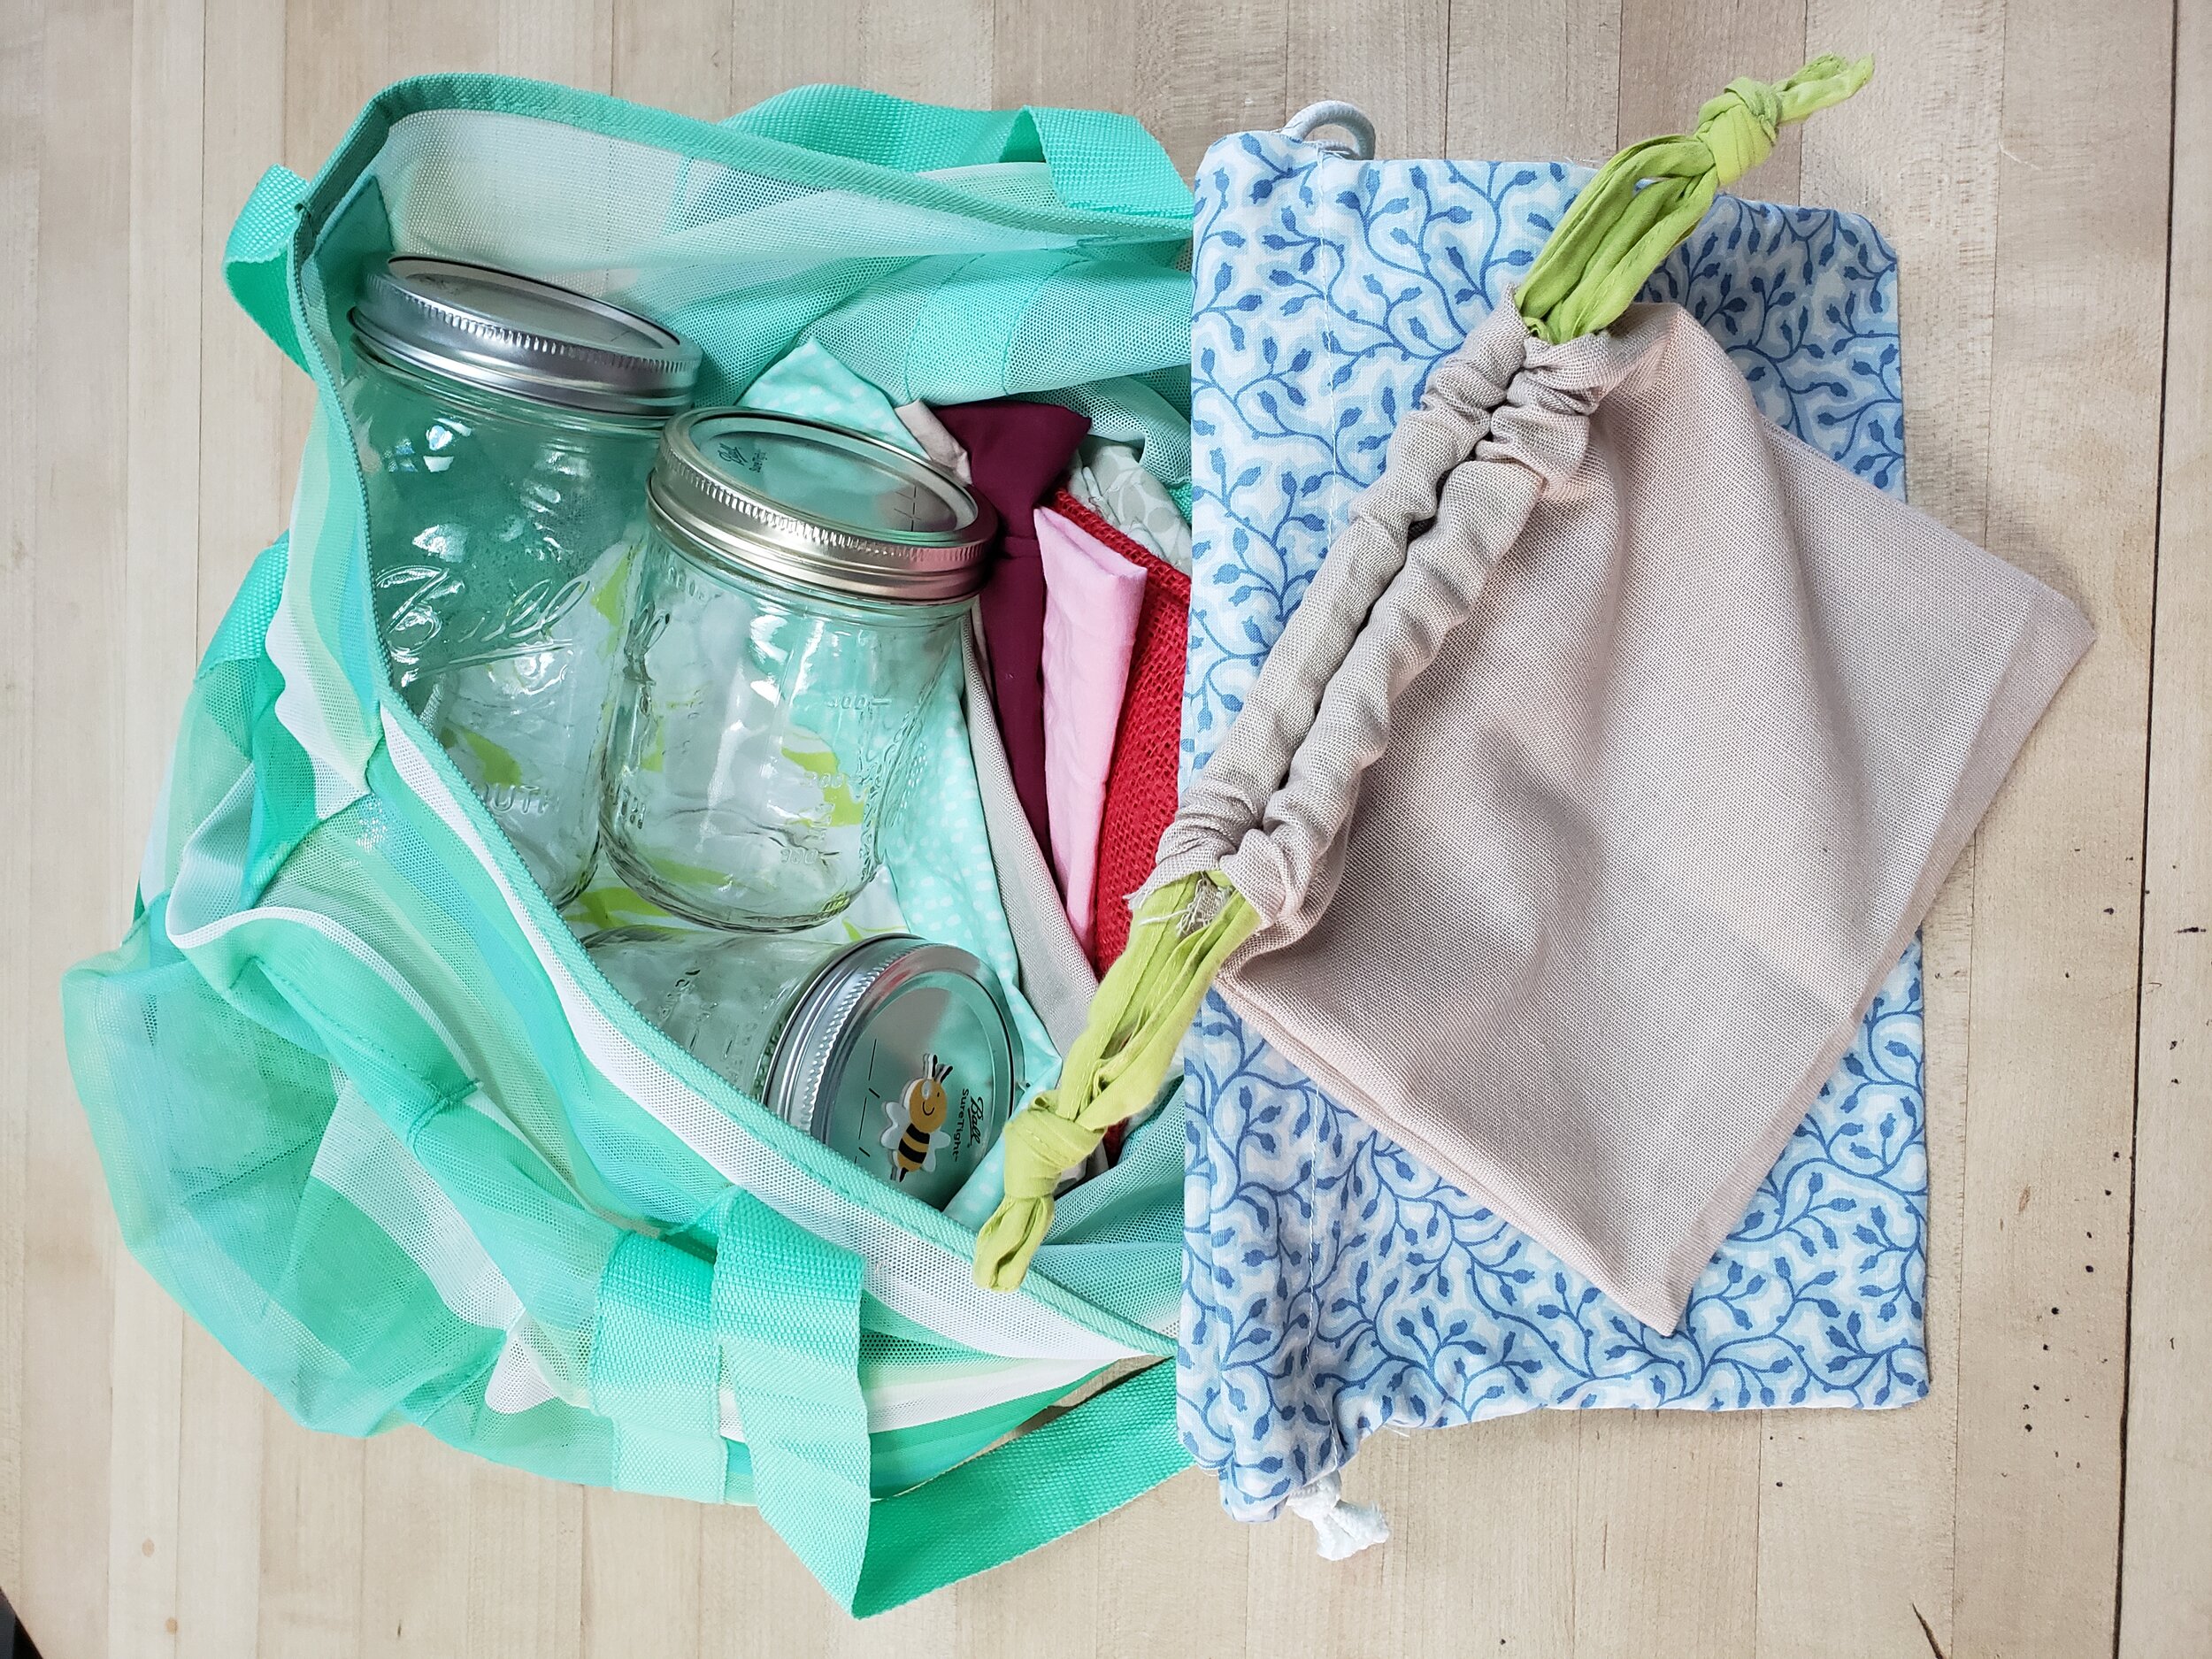  My shopping kit includes cloth bags for bulk solids, mesh bags for produce, and glass jars for liquids.  